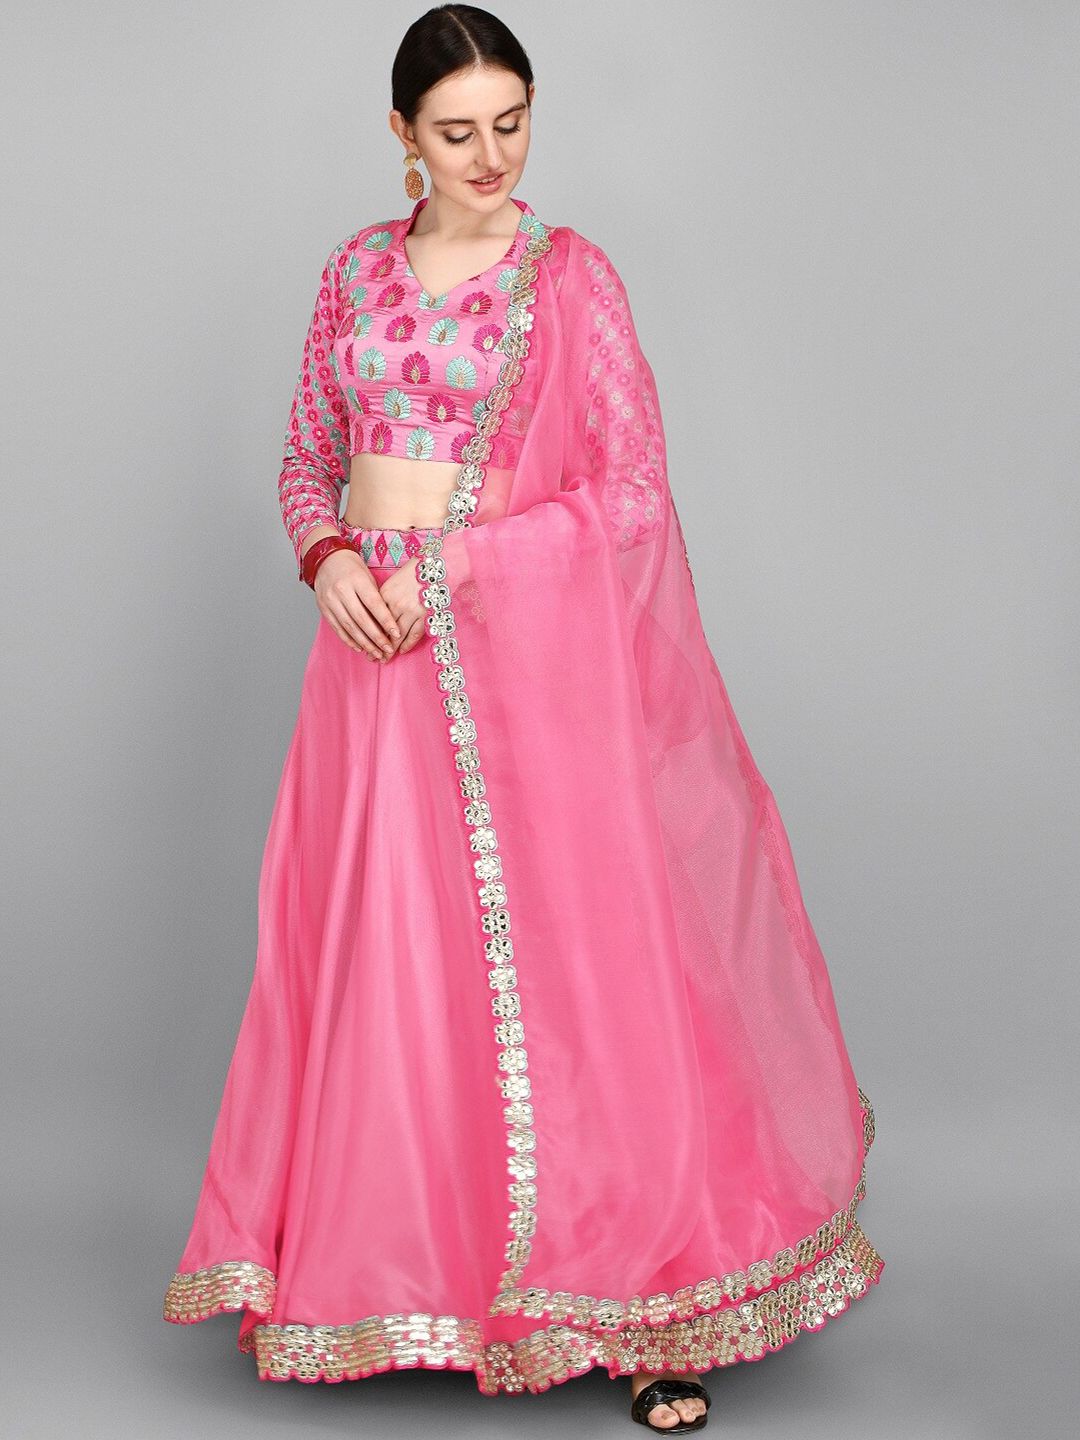 Fashion Basket Pink Embroidered Semi-Stitched Lehenga & Blouse With Dupatta Price in India